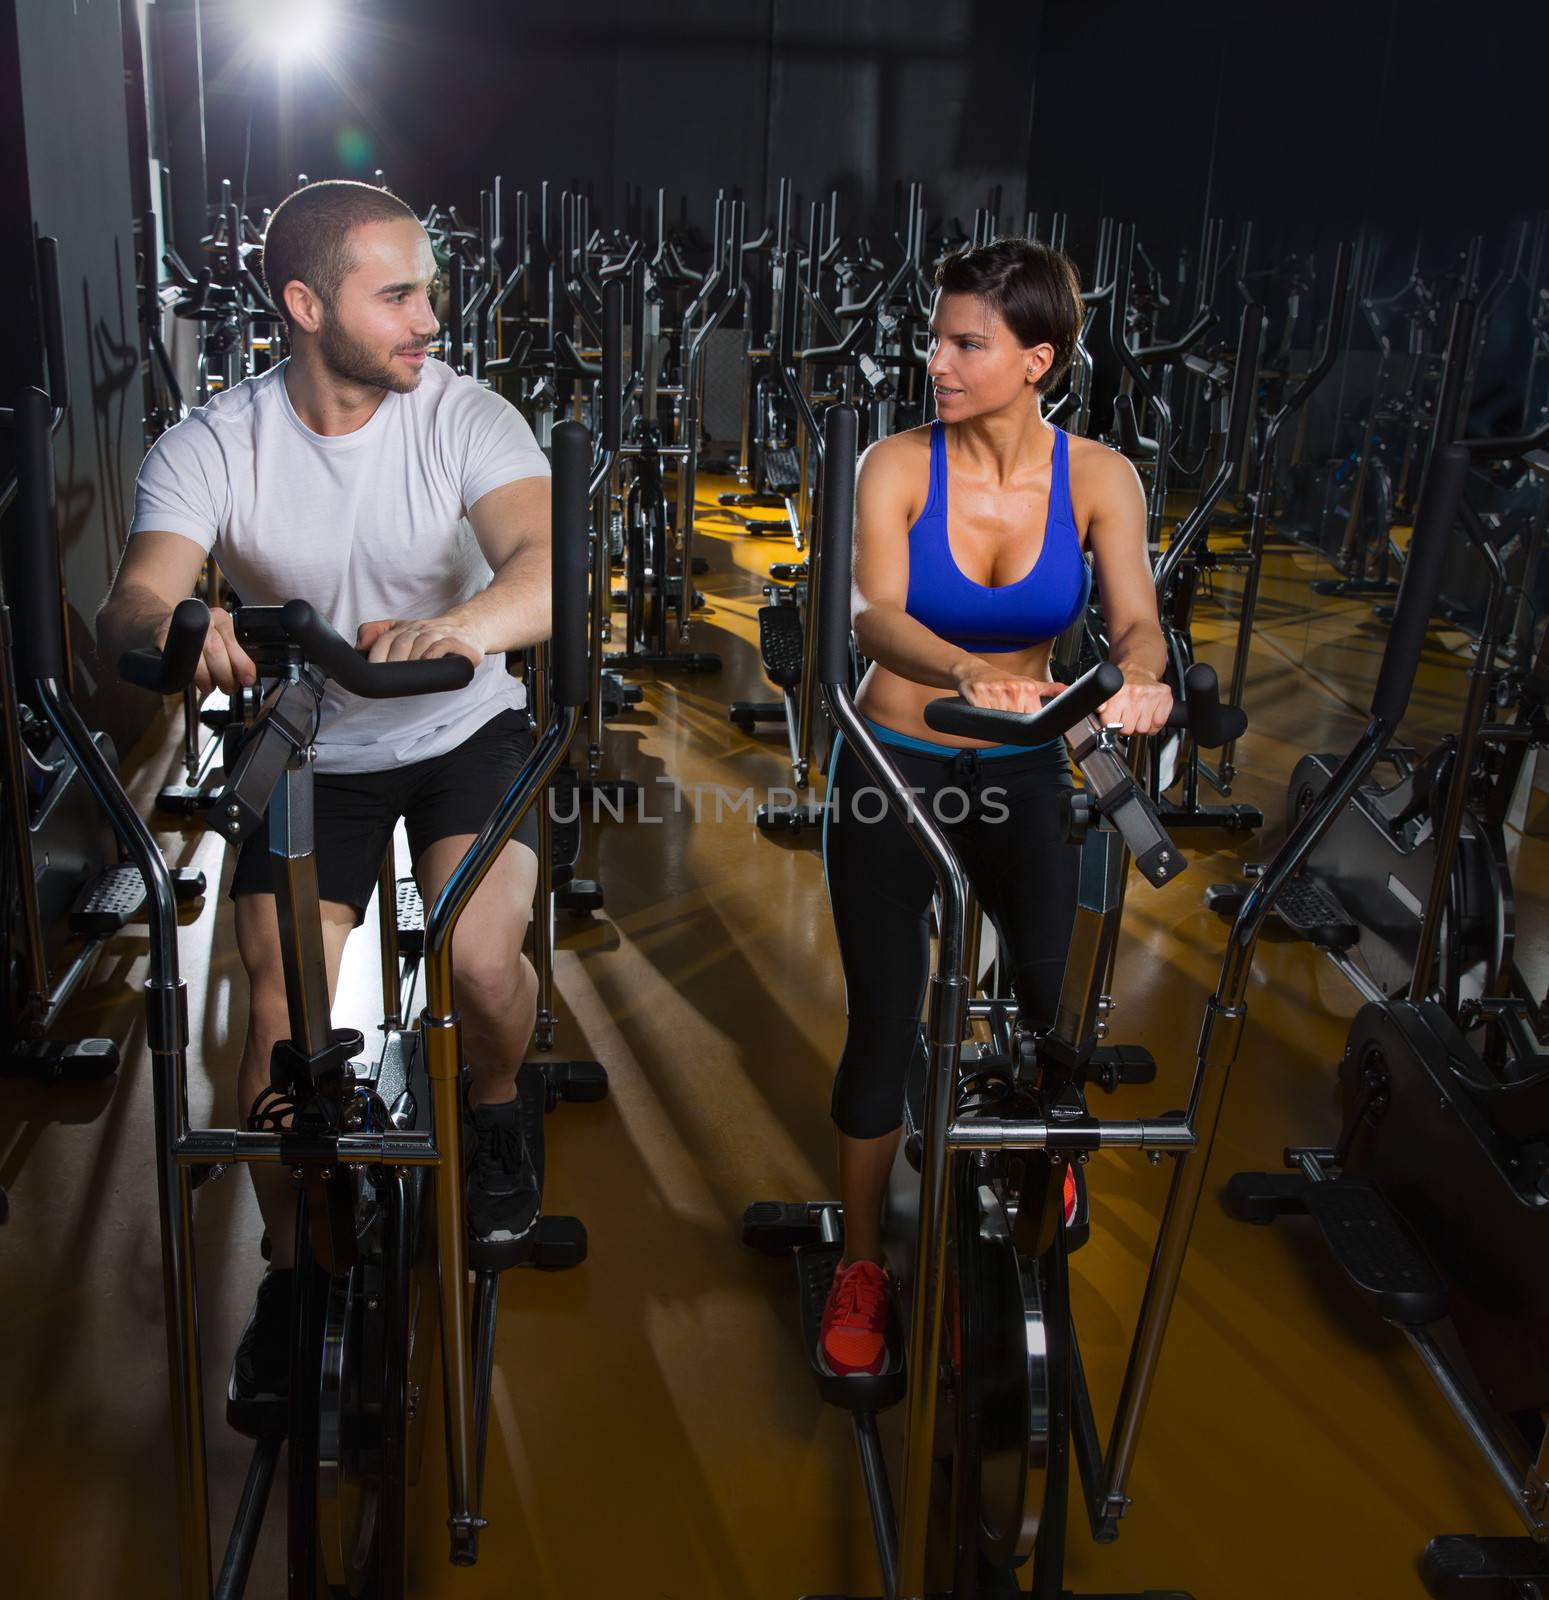 elliptical walker trainer man and woman at black gym training aerobics exercise